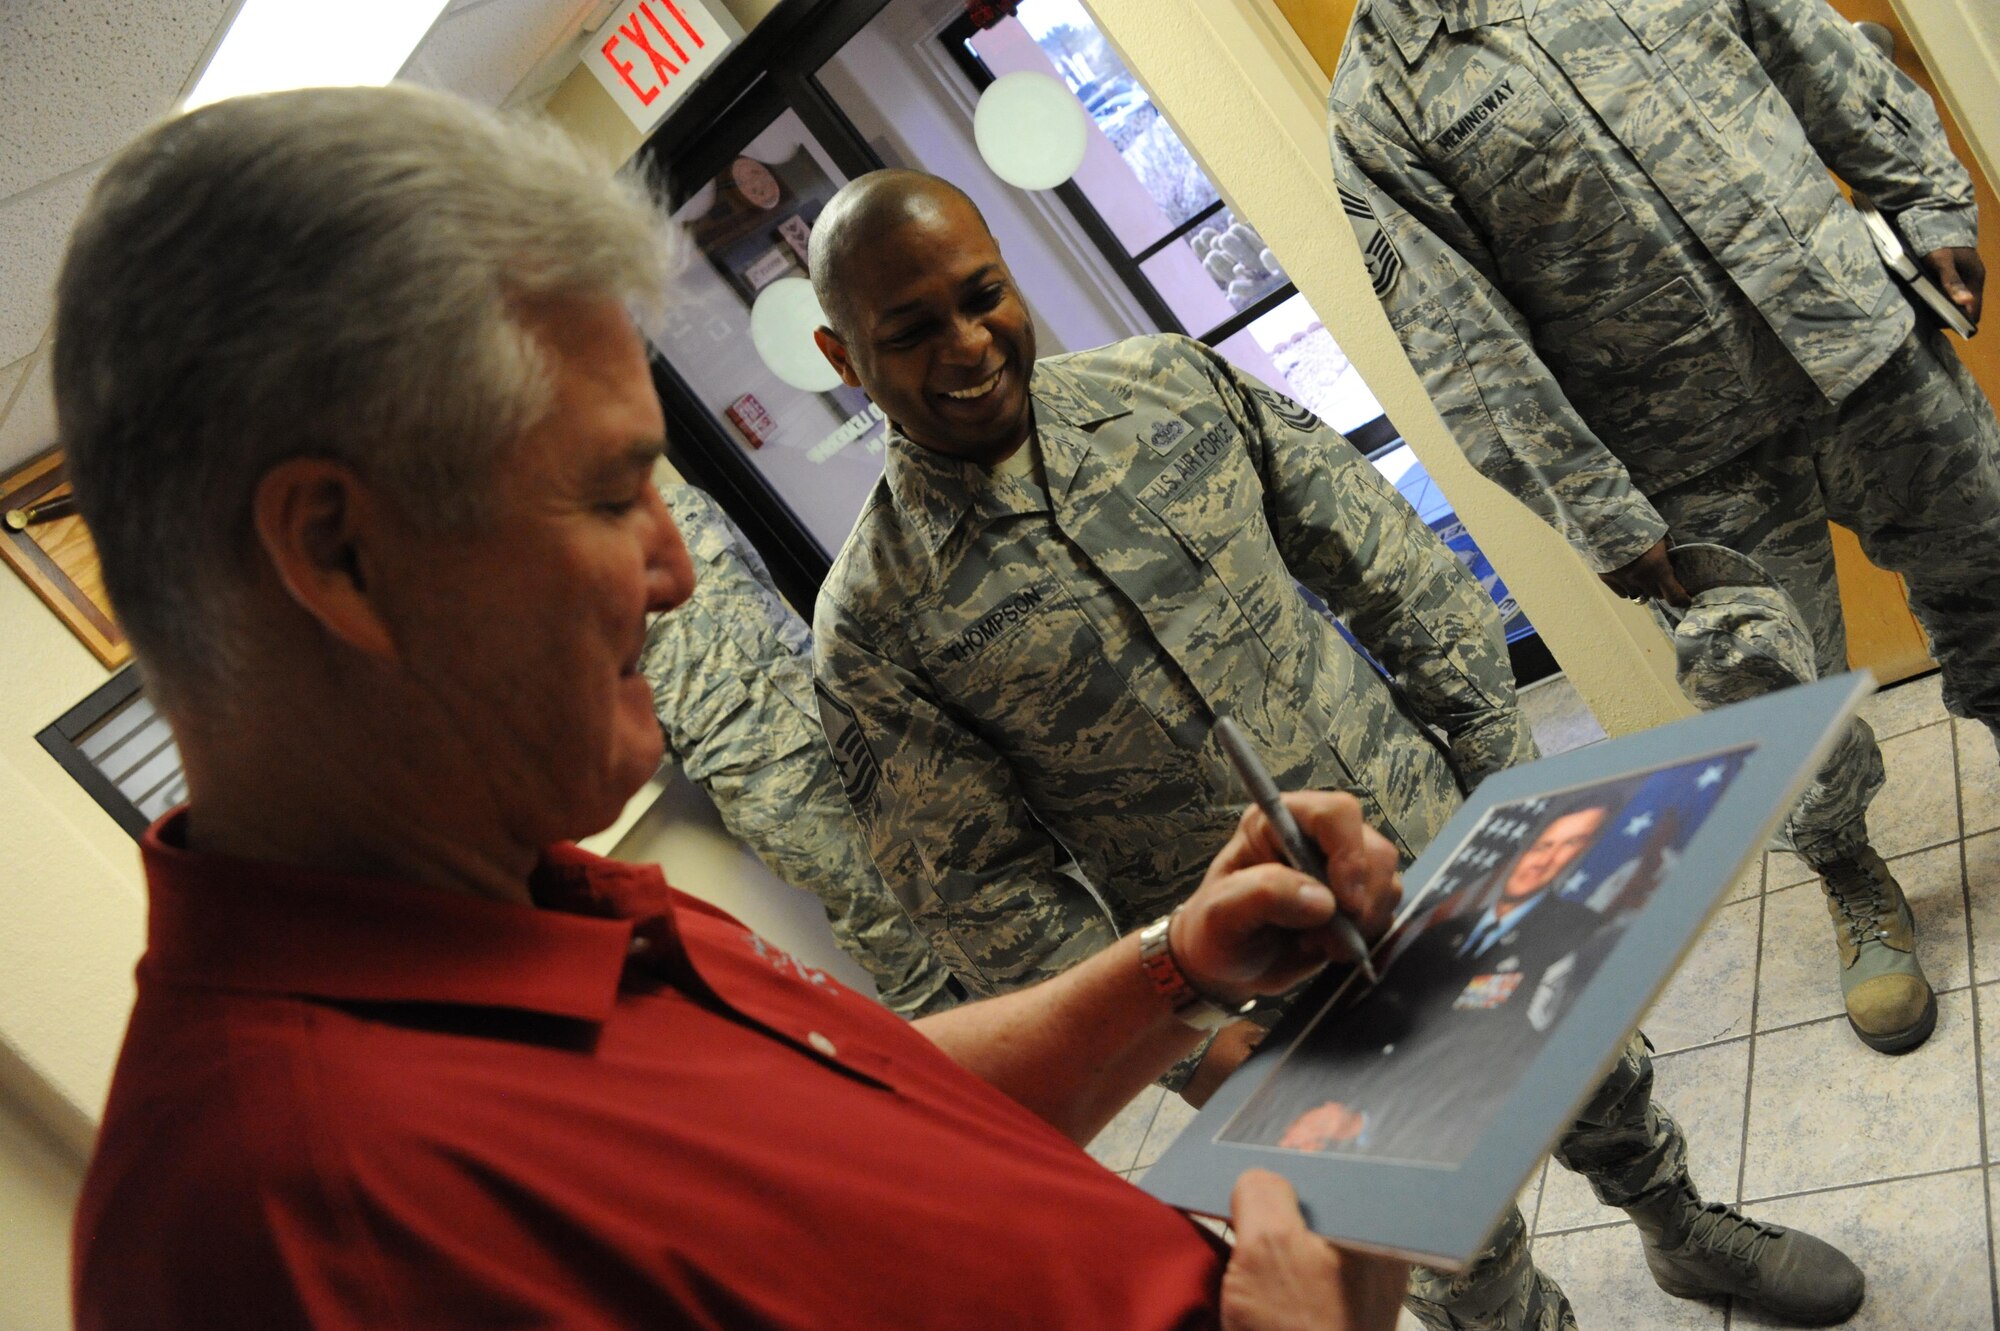 Master Sgt. Bruce Thompson, 56th Force Support Squadron Airmen Leadership School commandant, watches as Retired Chief Master Sgt. of the Air Force Gerald Murray autographs his last official photo from over 10 years ago on March 10, 2017, at Luke Air Force Base, Ariz. Murray visited several different agencies around Luke and was the guest speaker for the Maintenance Professional of the Year event which took place March 11, 2017. (U.S. Air Force photo by Airman 1st Class Caleb Worpel)